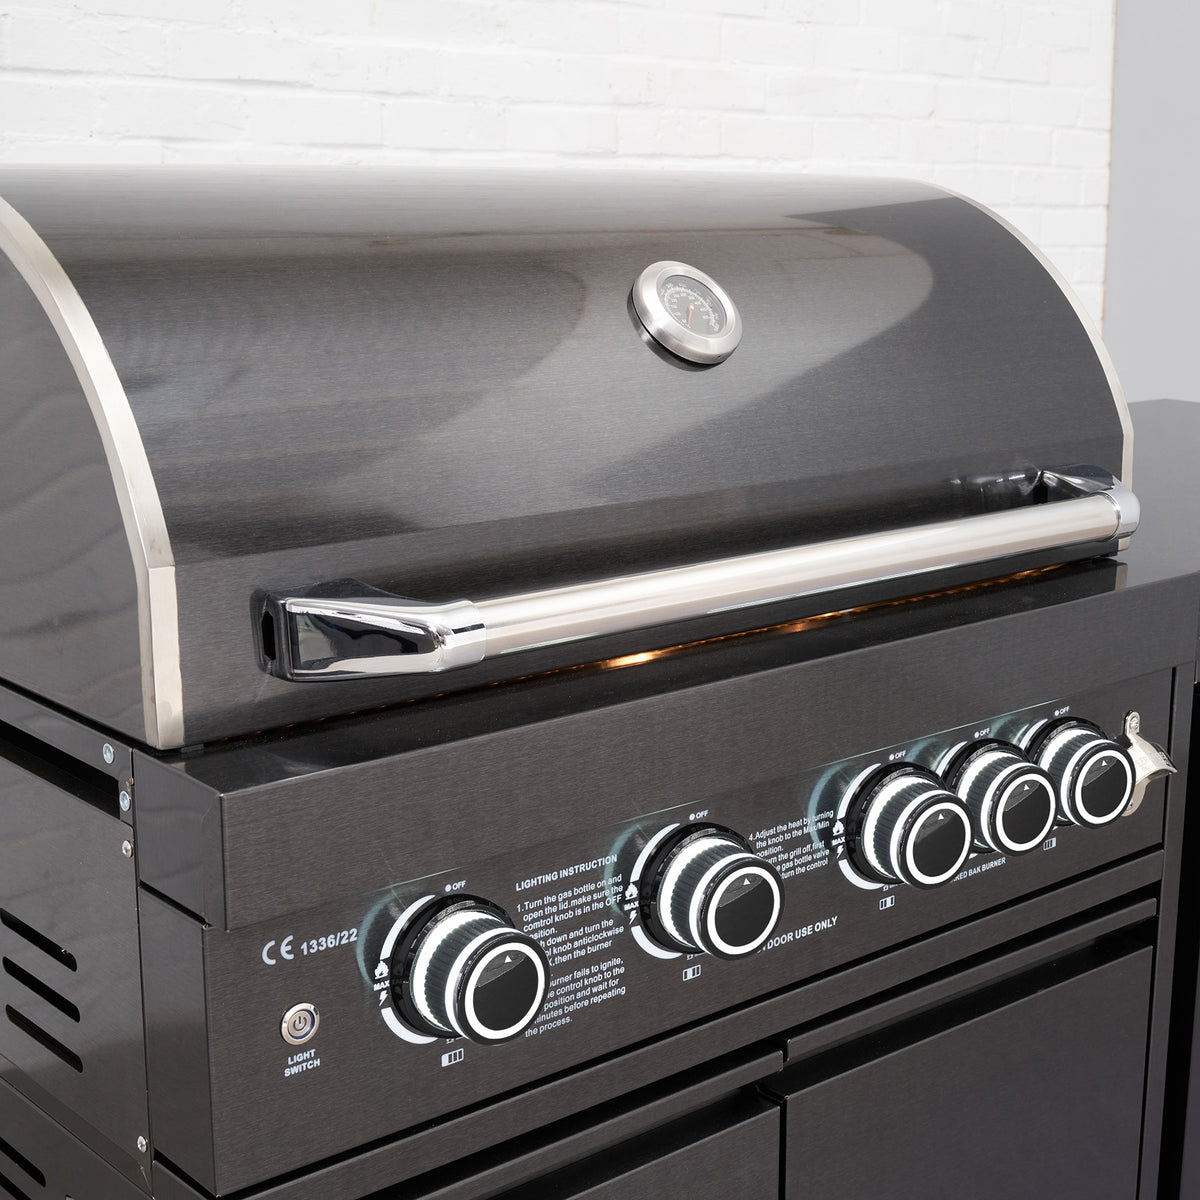 Draco Grills 4 Burner BBQ Black Stainless Steel Modular Outdoor Kitchen with Sear Station and Fridge Unit